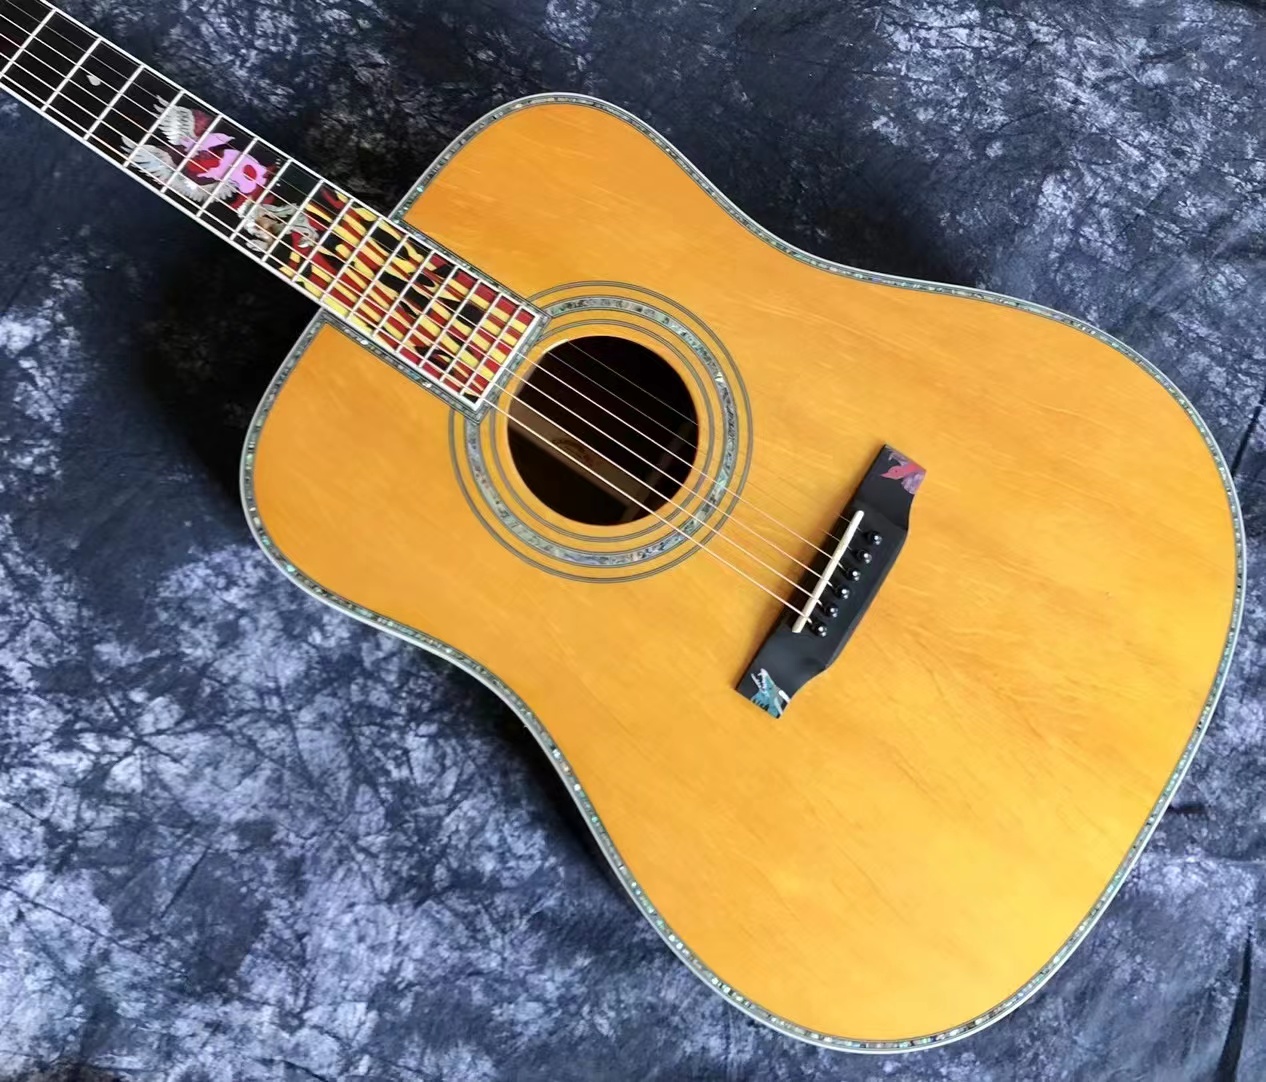 The Martin D42: A High-End Acoustic Guitar with Superior Craftsmanship